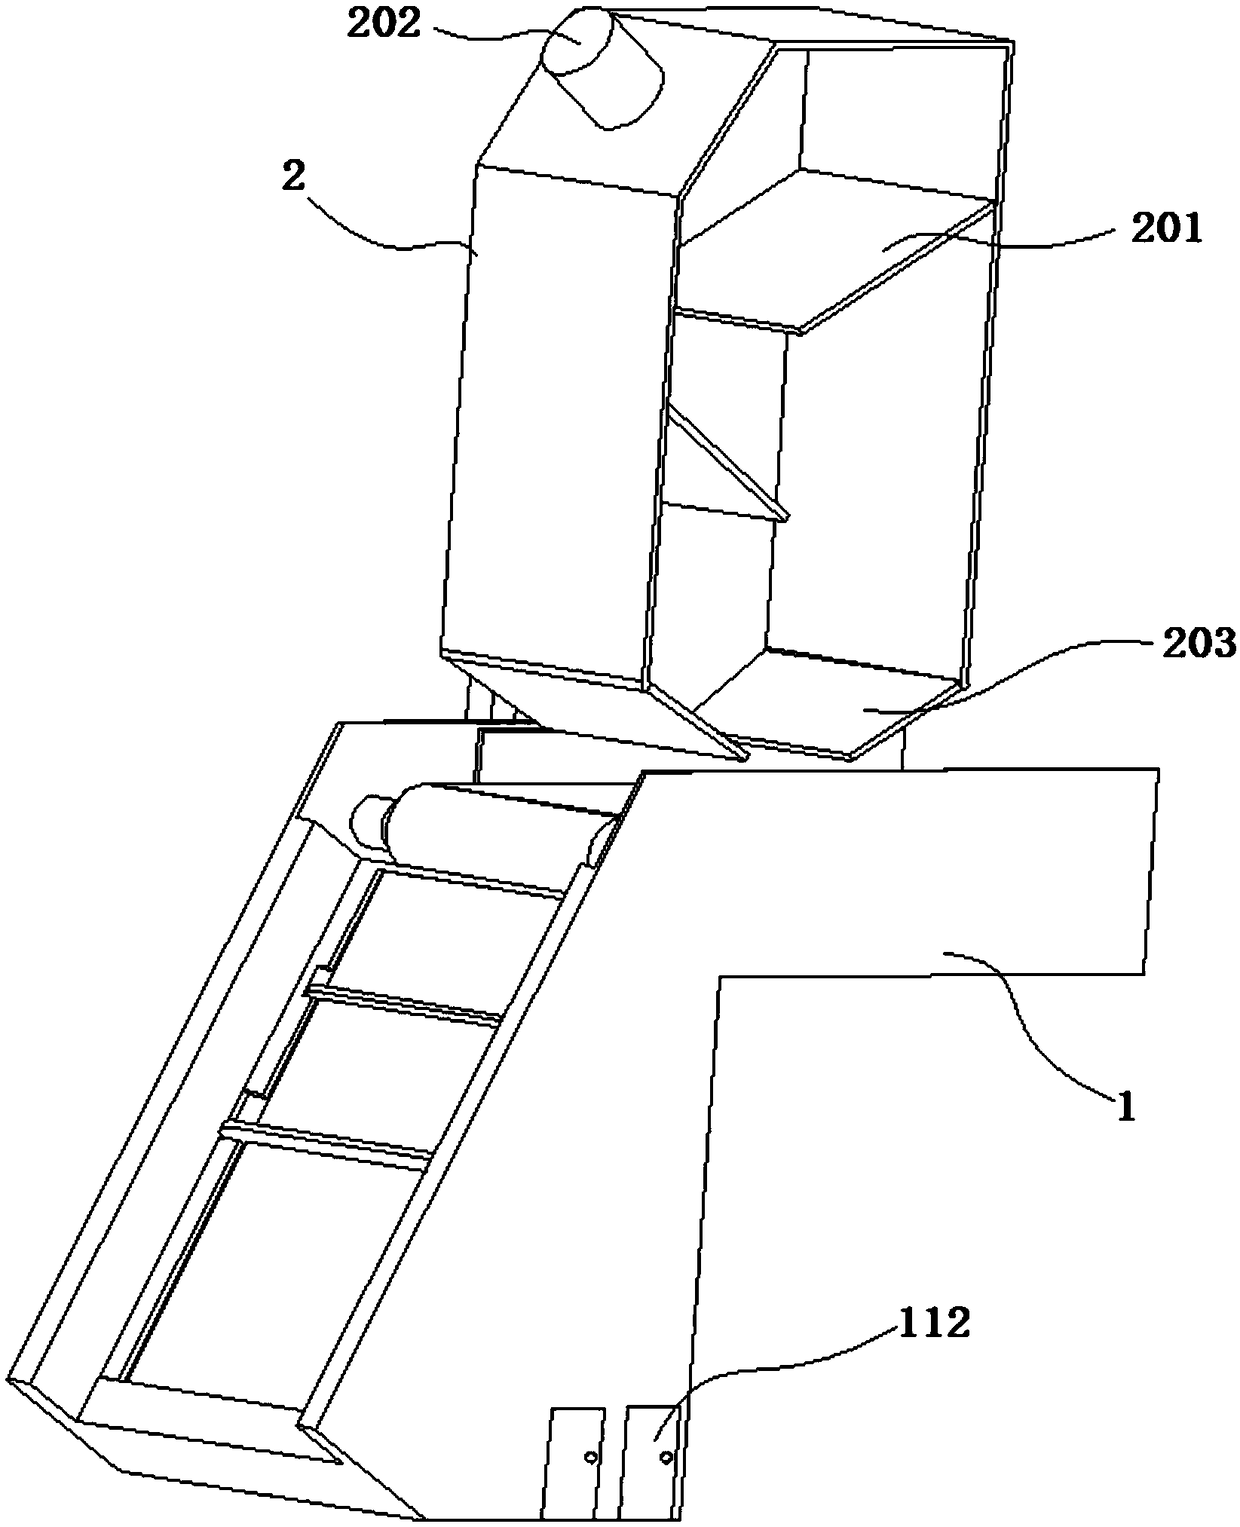 Discharging and sorting device for color sorter